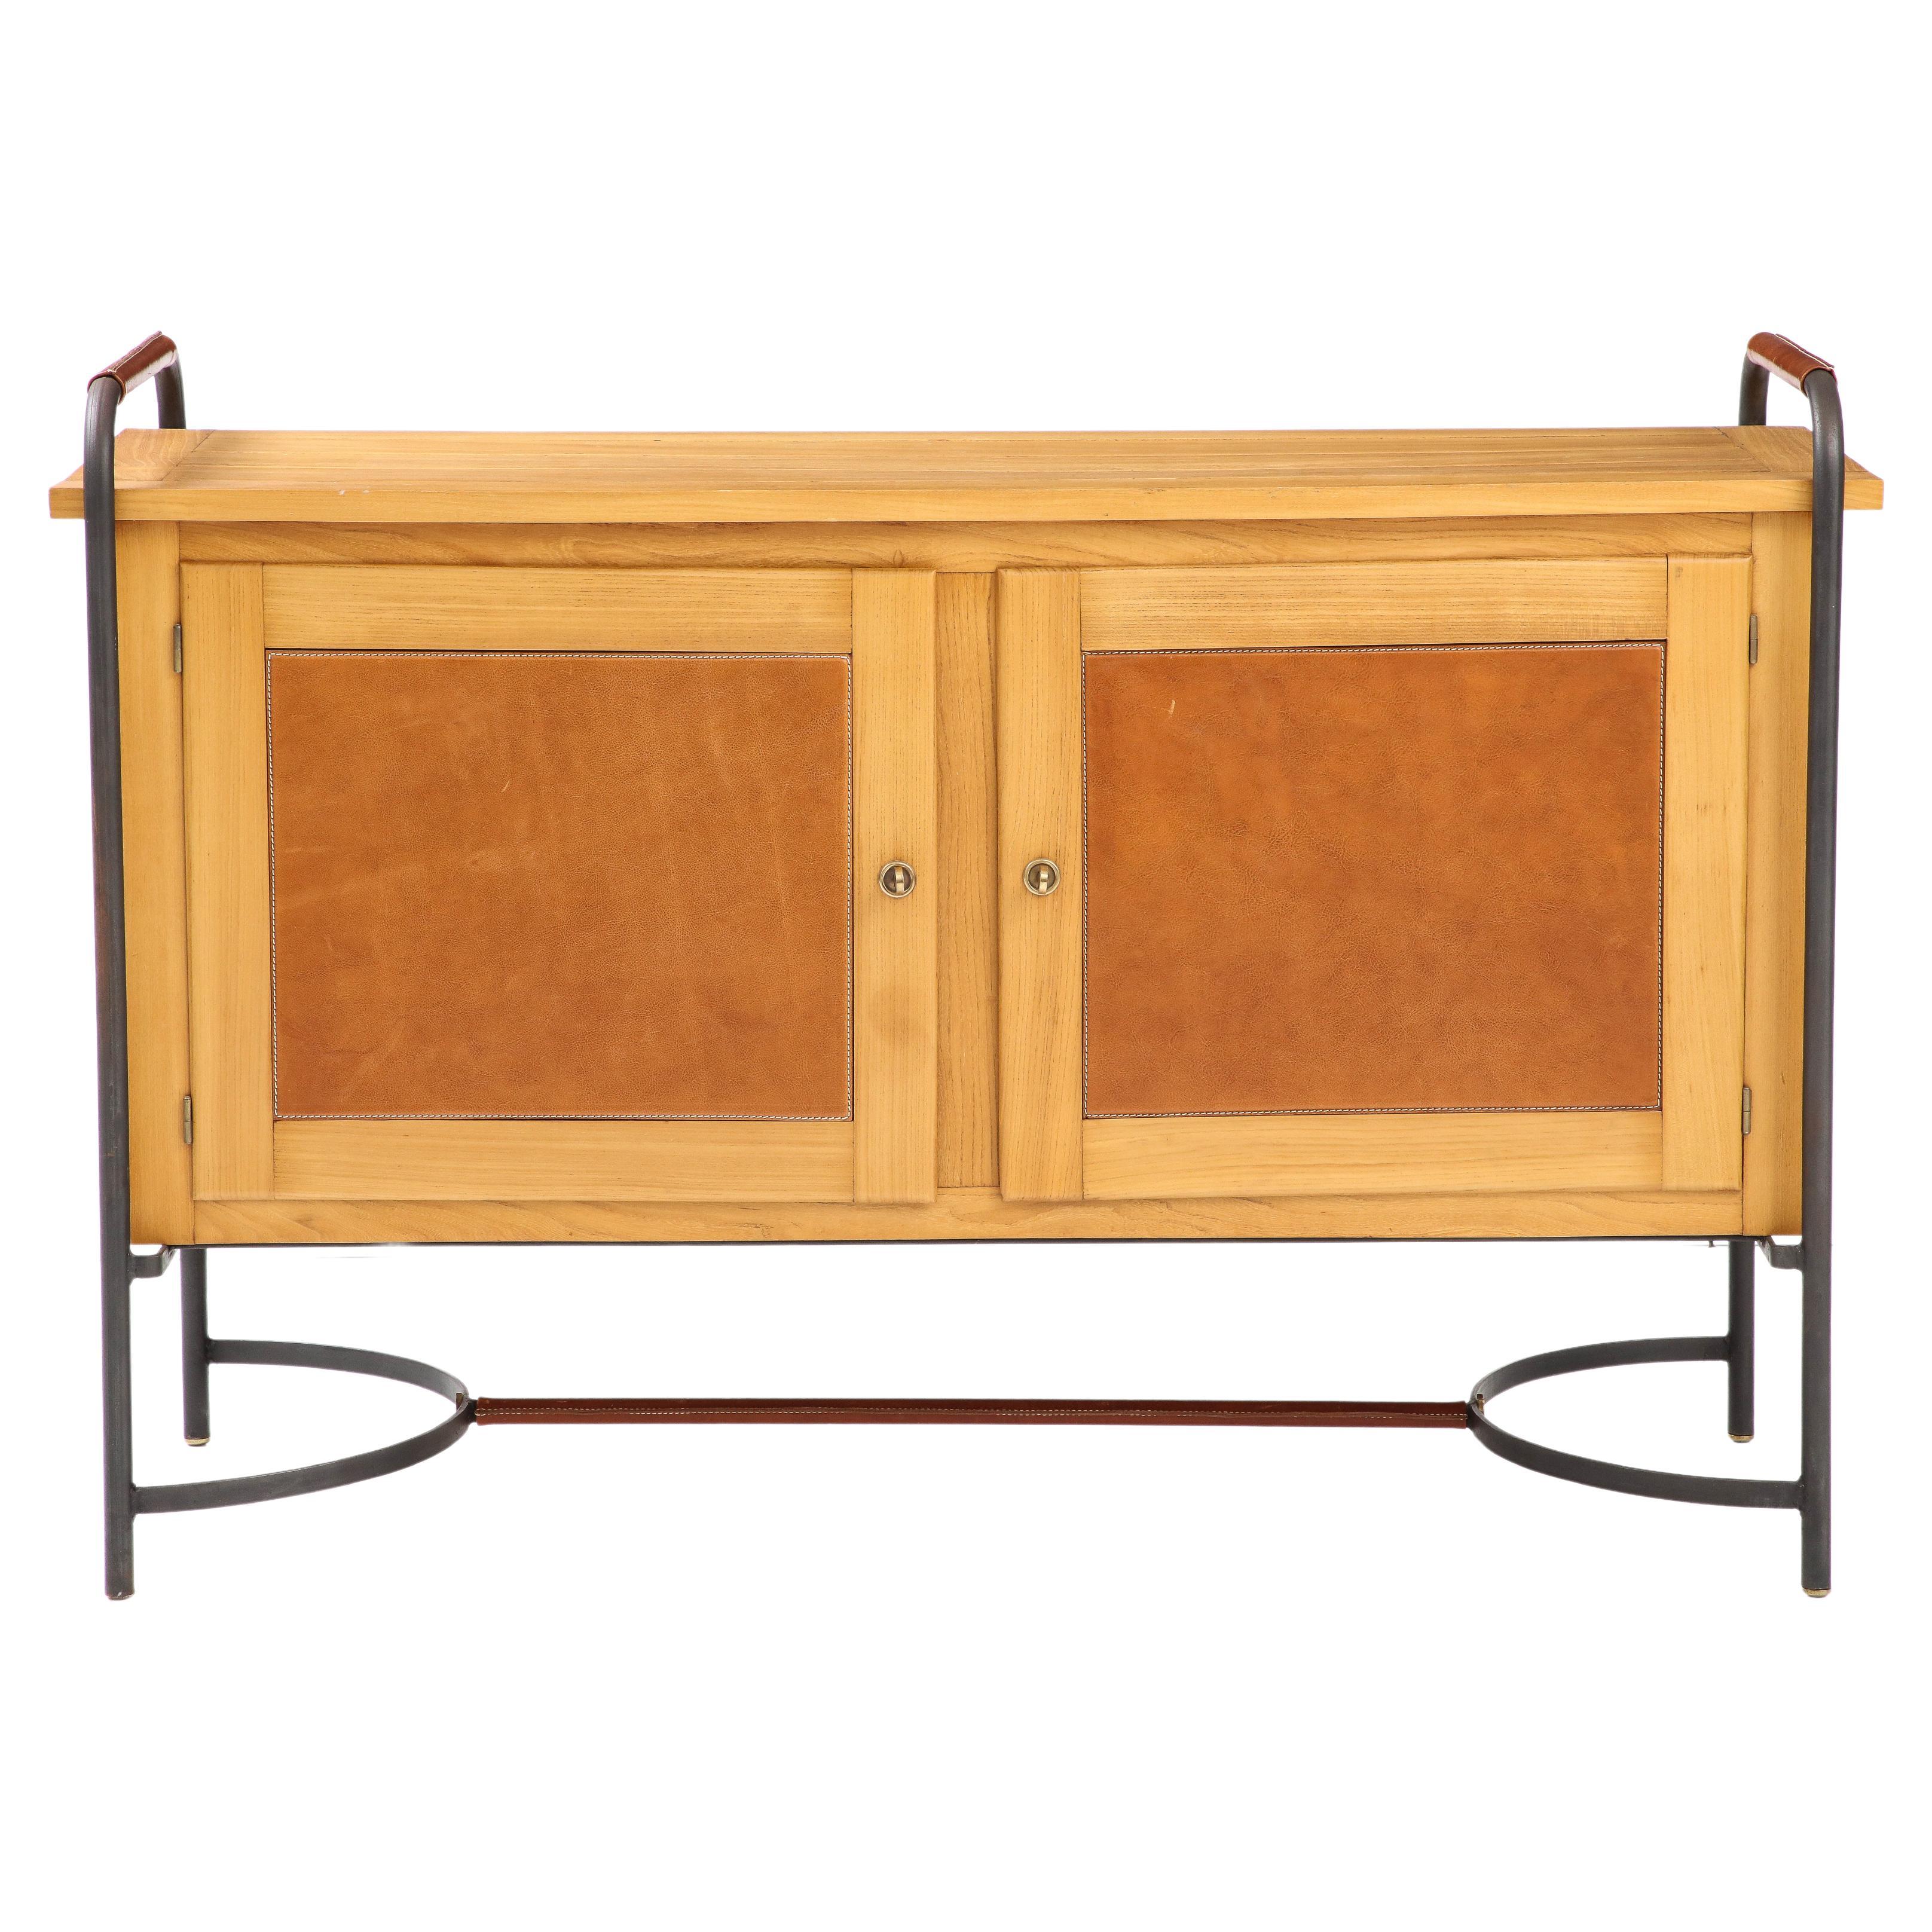 Rare Equestrian-Style Cabinet by Jacques Adnet, France, c. 1950s